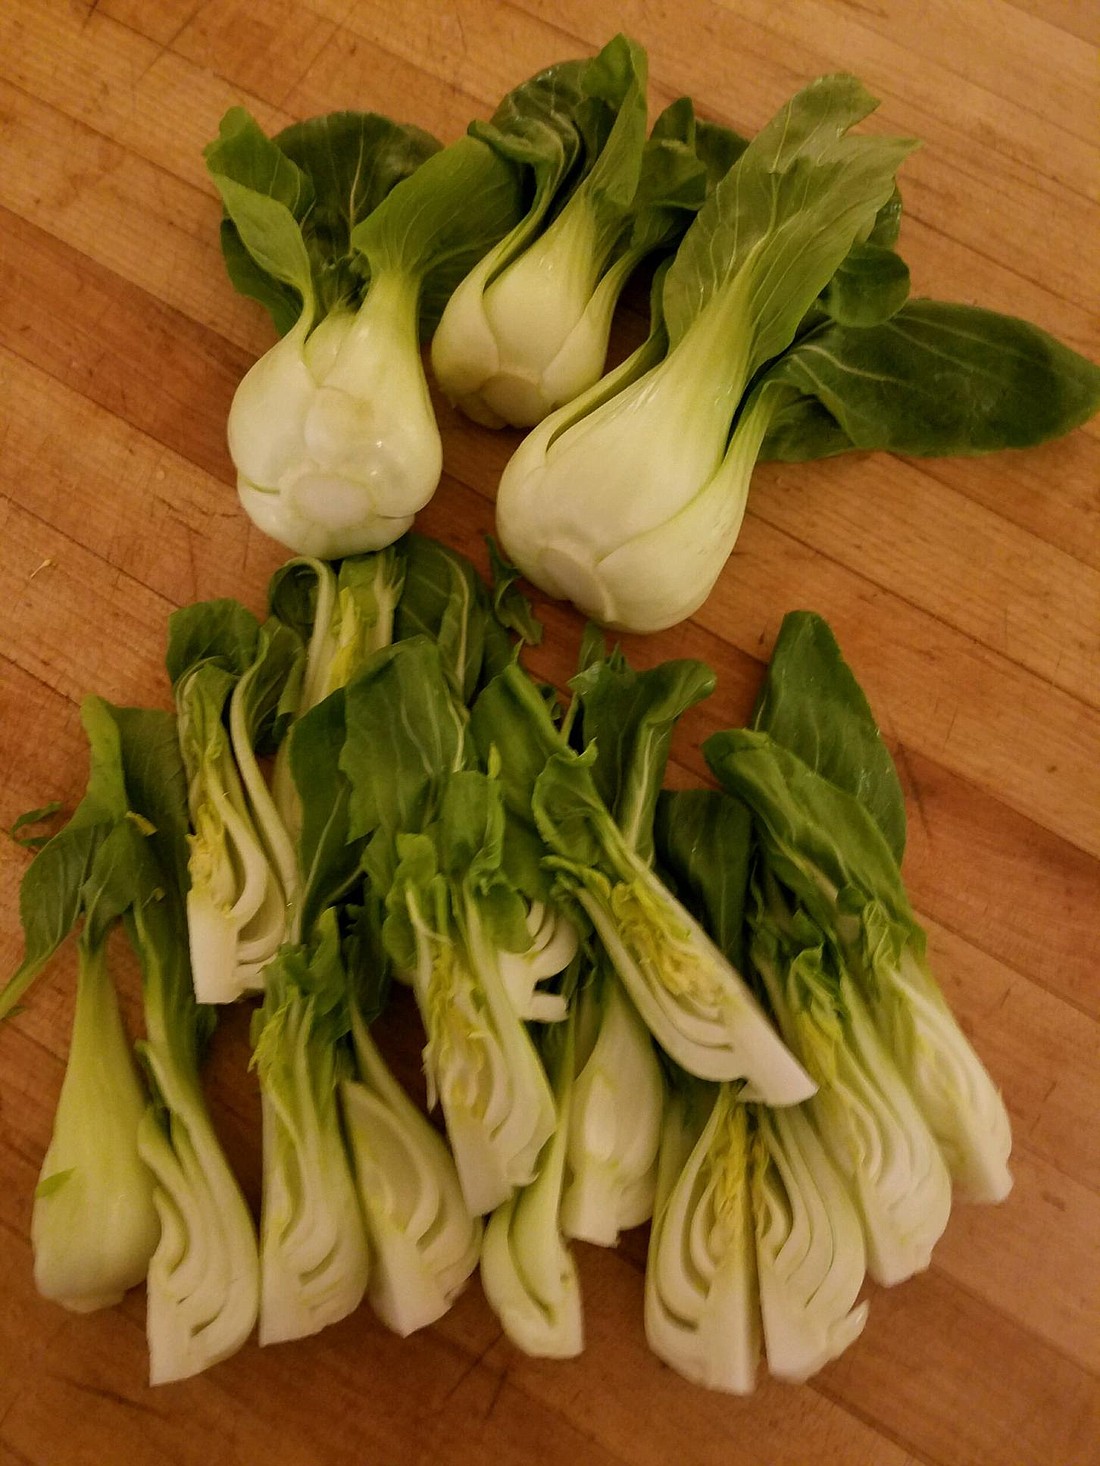 Choose bok choy or the more tender baby bok choy to have some excellent ingredients to make several healthy and delicious dishes.